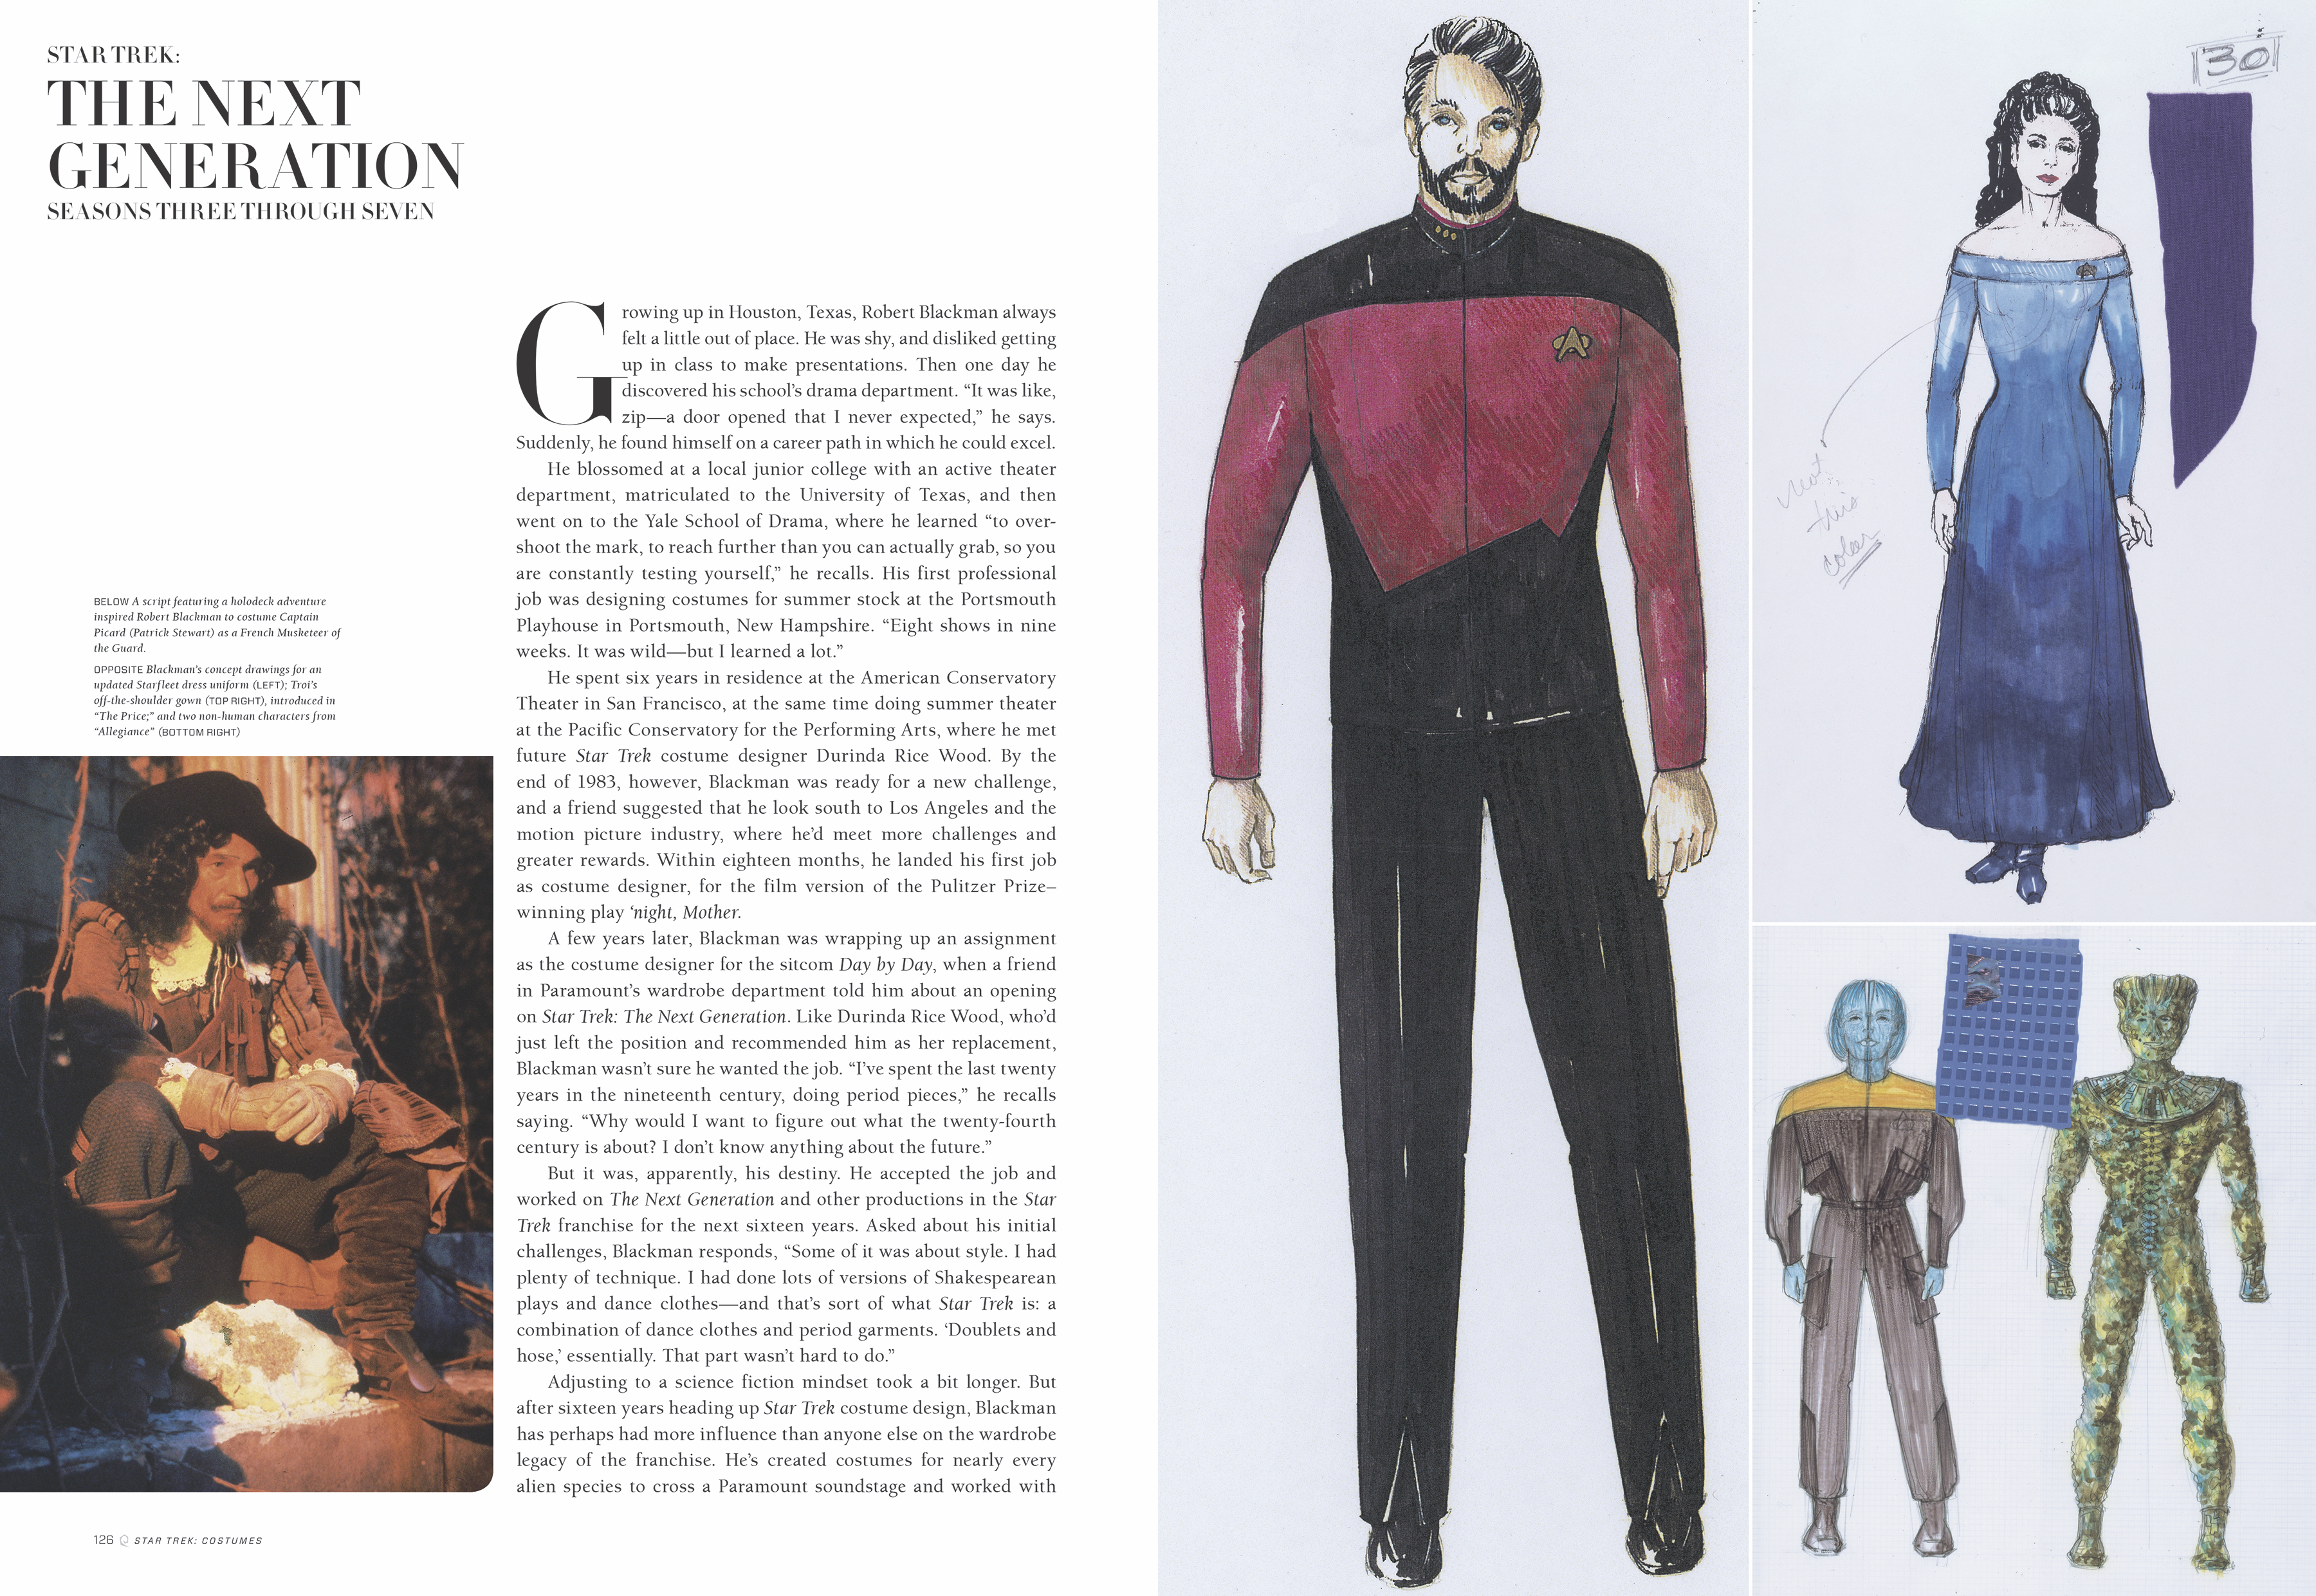 Star Trek: The Next Generation pages from the Star Trek Costumes book